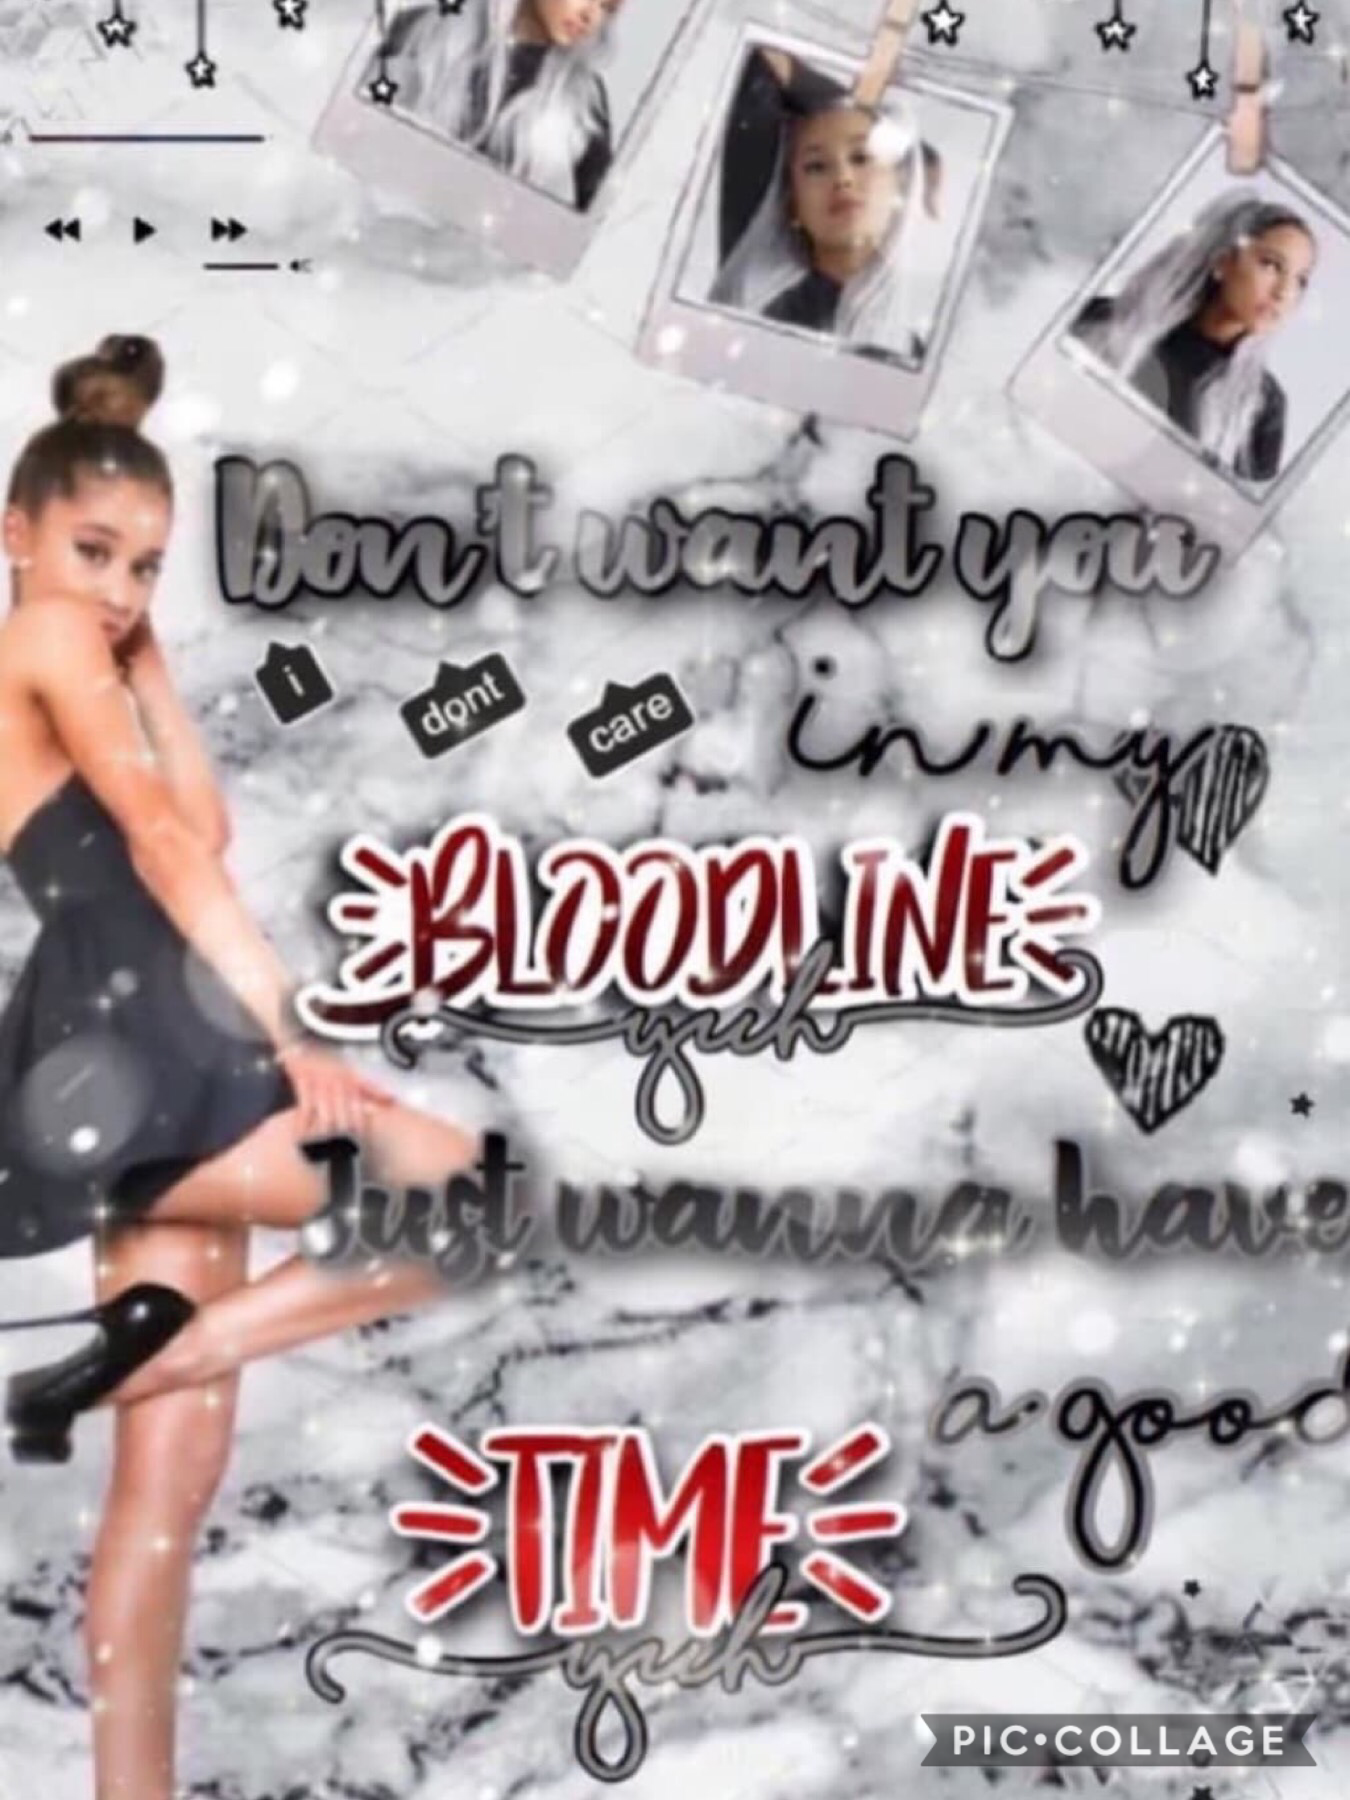 COLLAB WITHHHH....❤️❤️❤️
DESCENDANTS_QUEEN! SHE DID THE AMAZING BACKGROUND AND I DID THE TEXT! it was so fun collabing with you! ❤️❤️💕💕💕❤️❤️😍😍😘😘😘😍😍